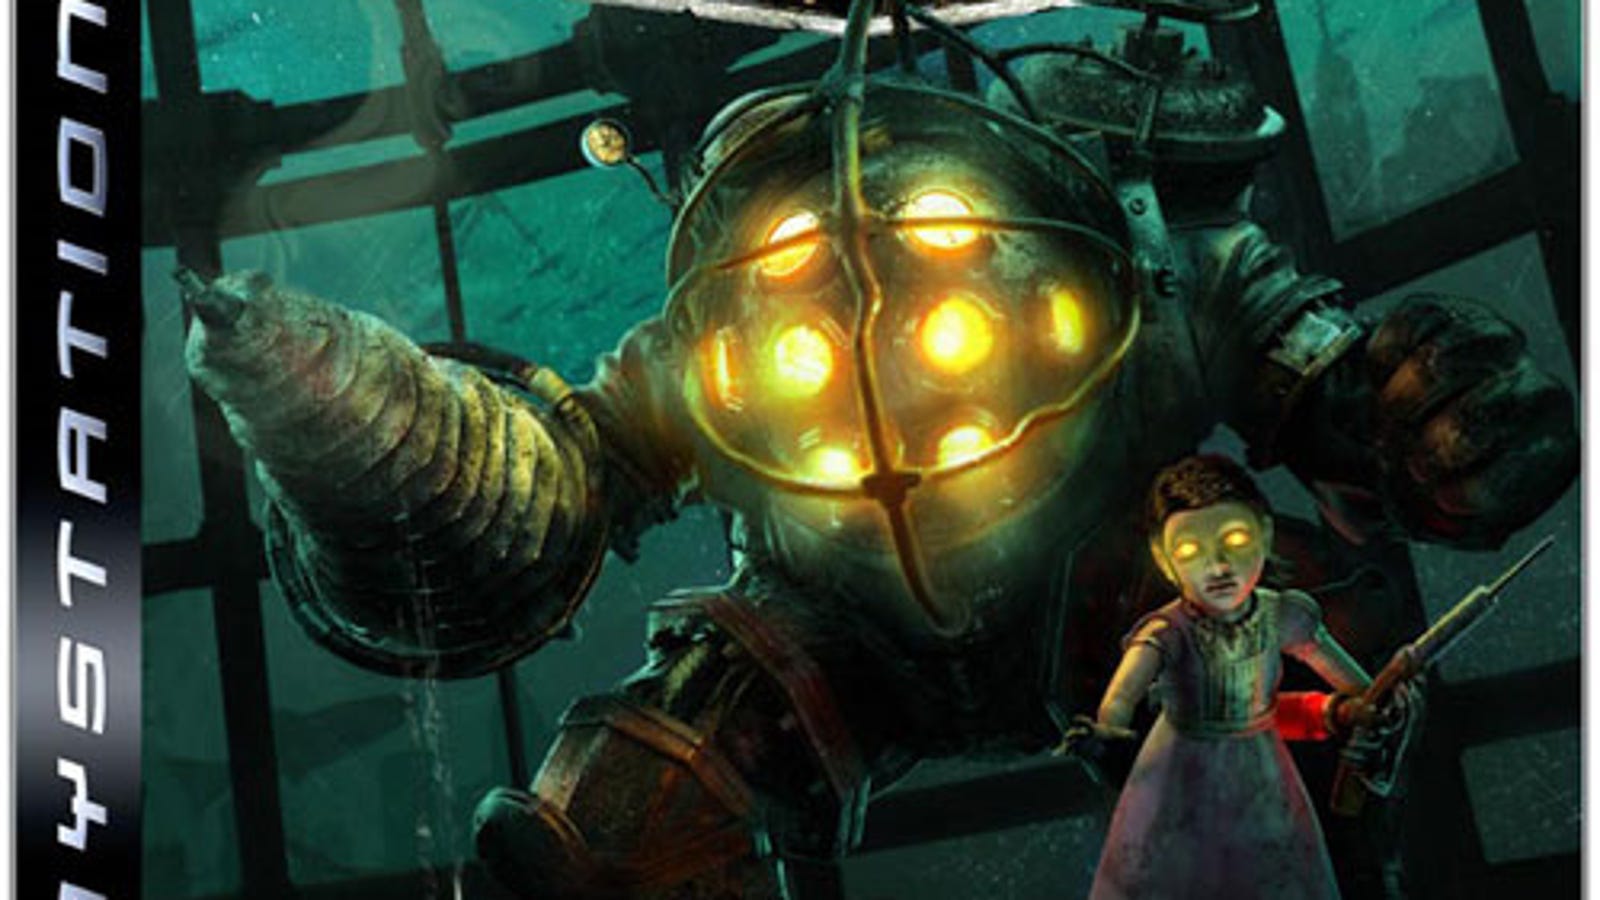 bioshock-ps3-looks-better-plays-harder-say-ign